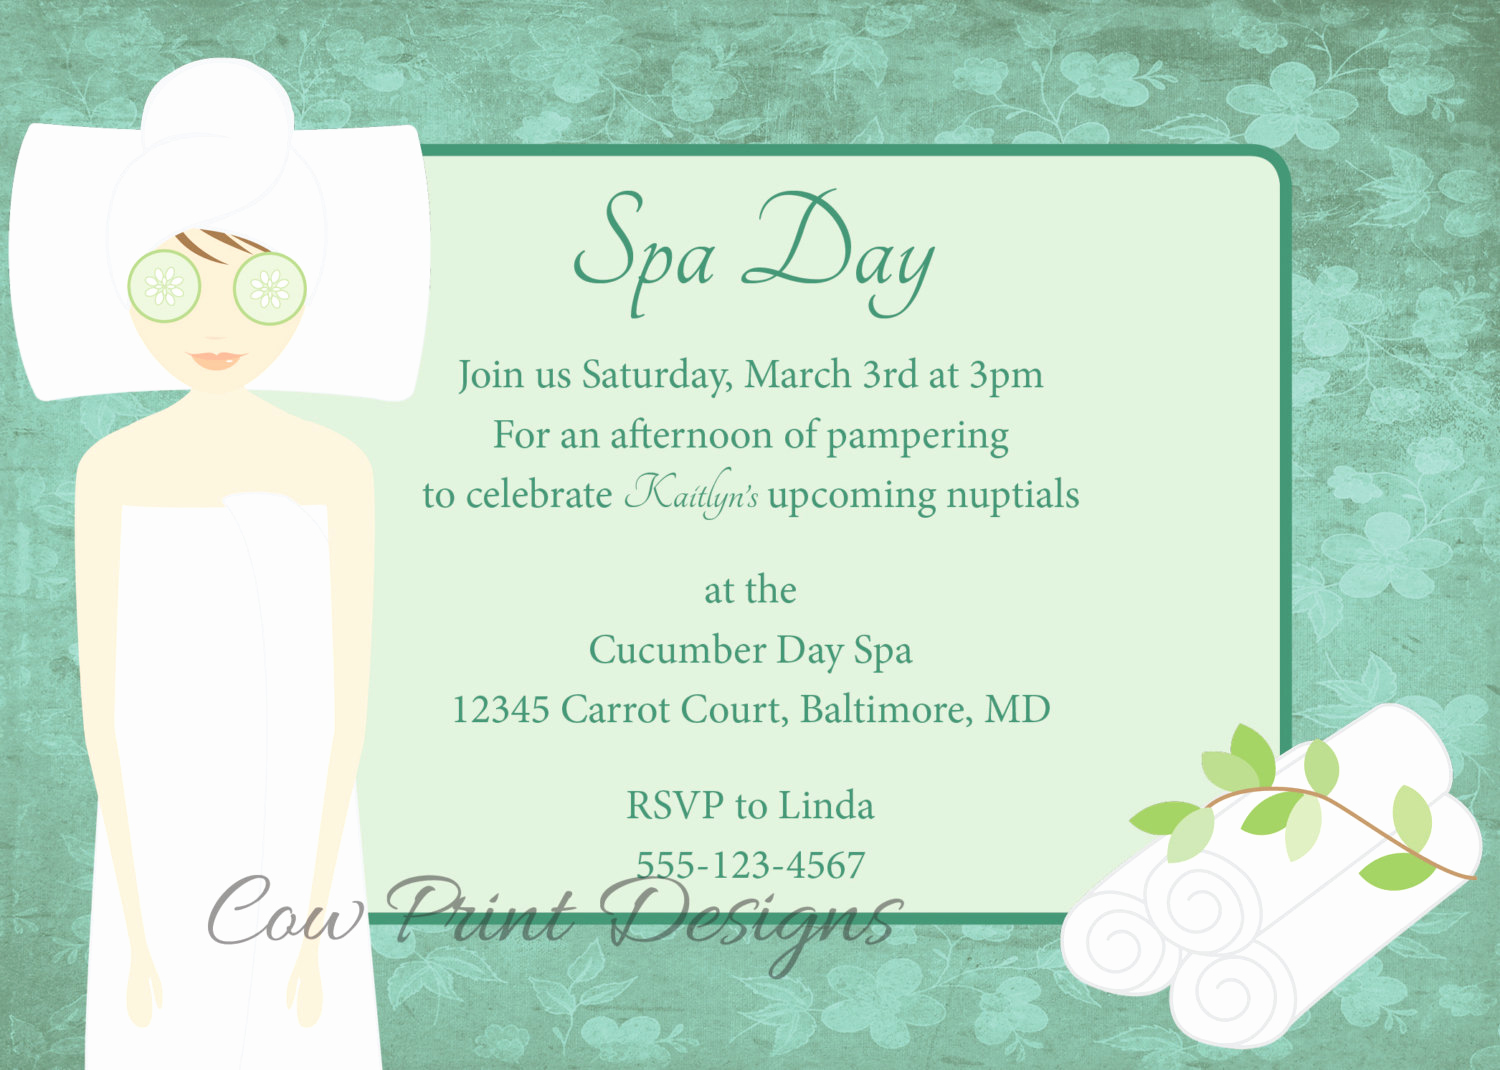 Spa Party Invitation Wording Lovely Spa Day Invitation Spa Bachelorette Party Invite Spa Invite